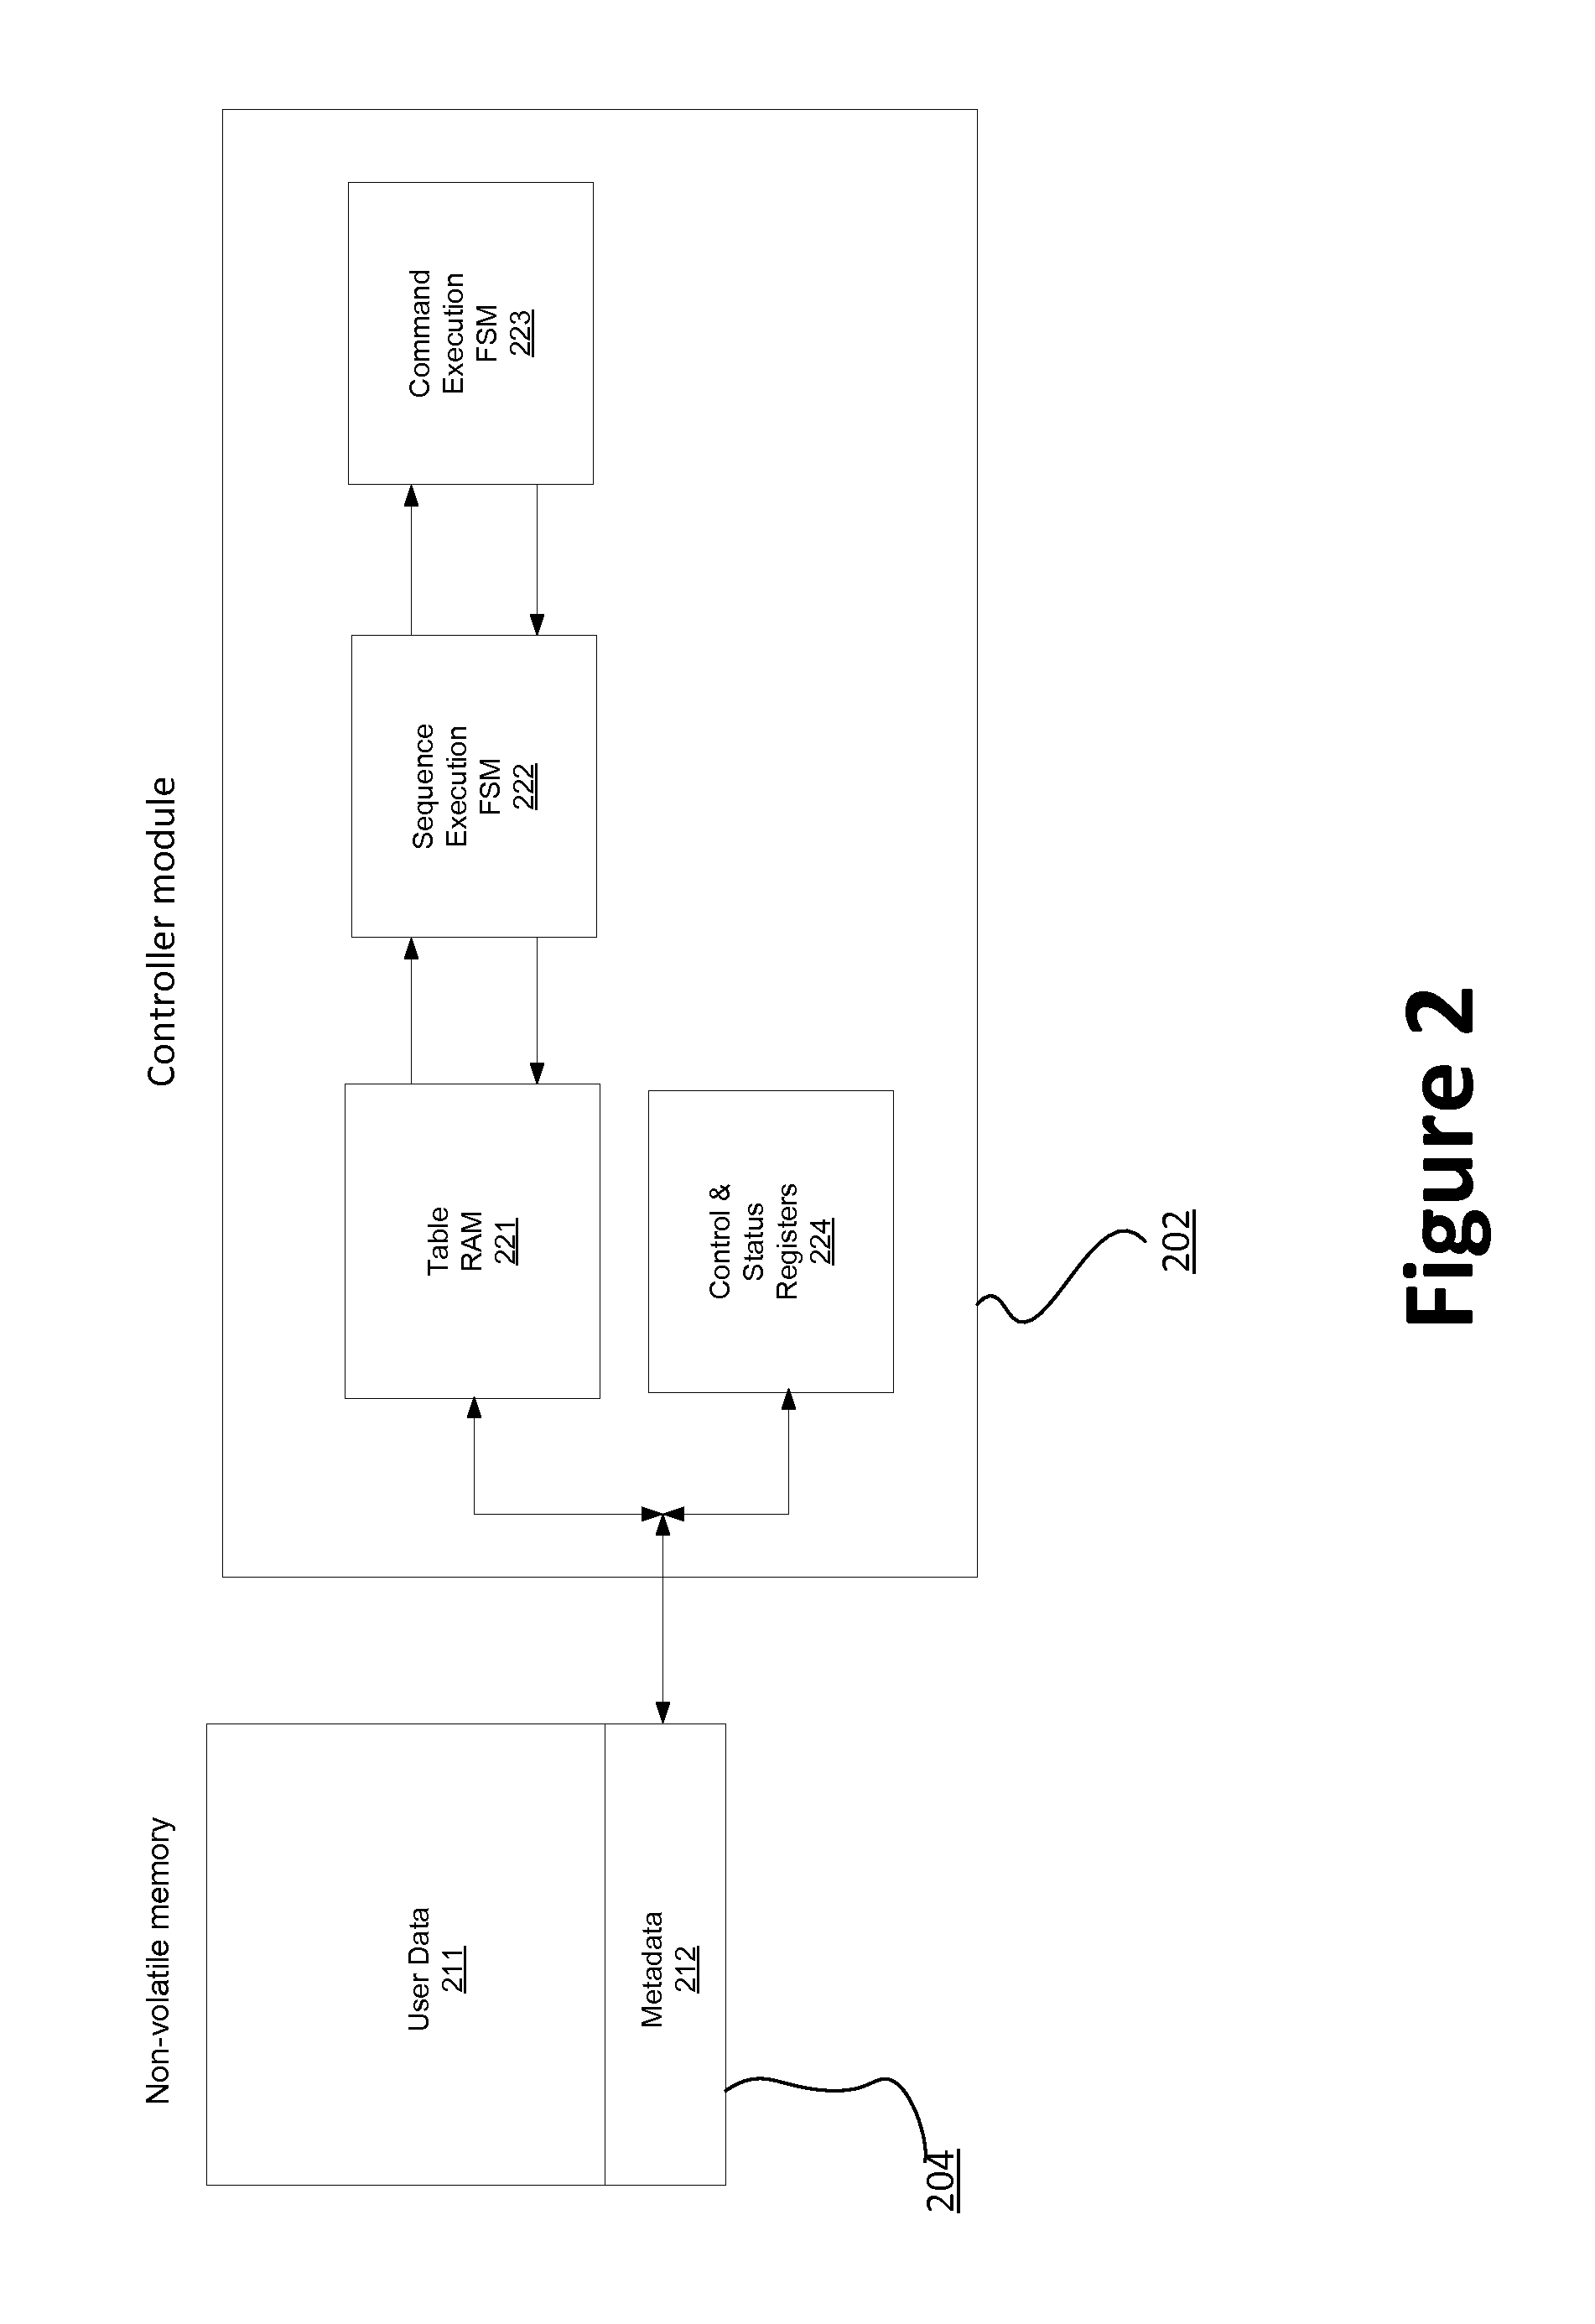 Memory controller system with non-volatile backup storage